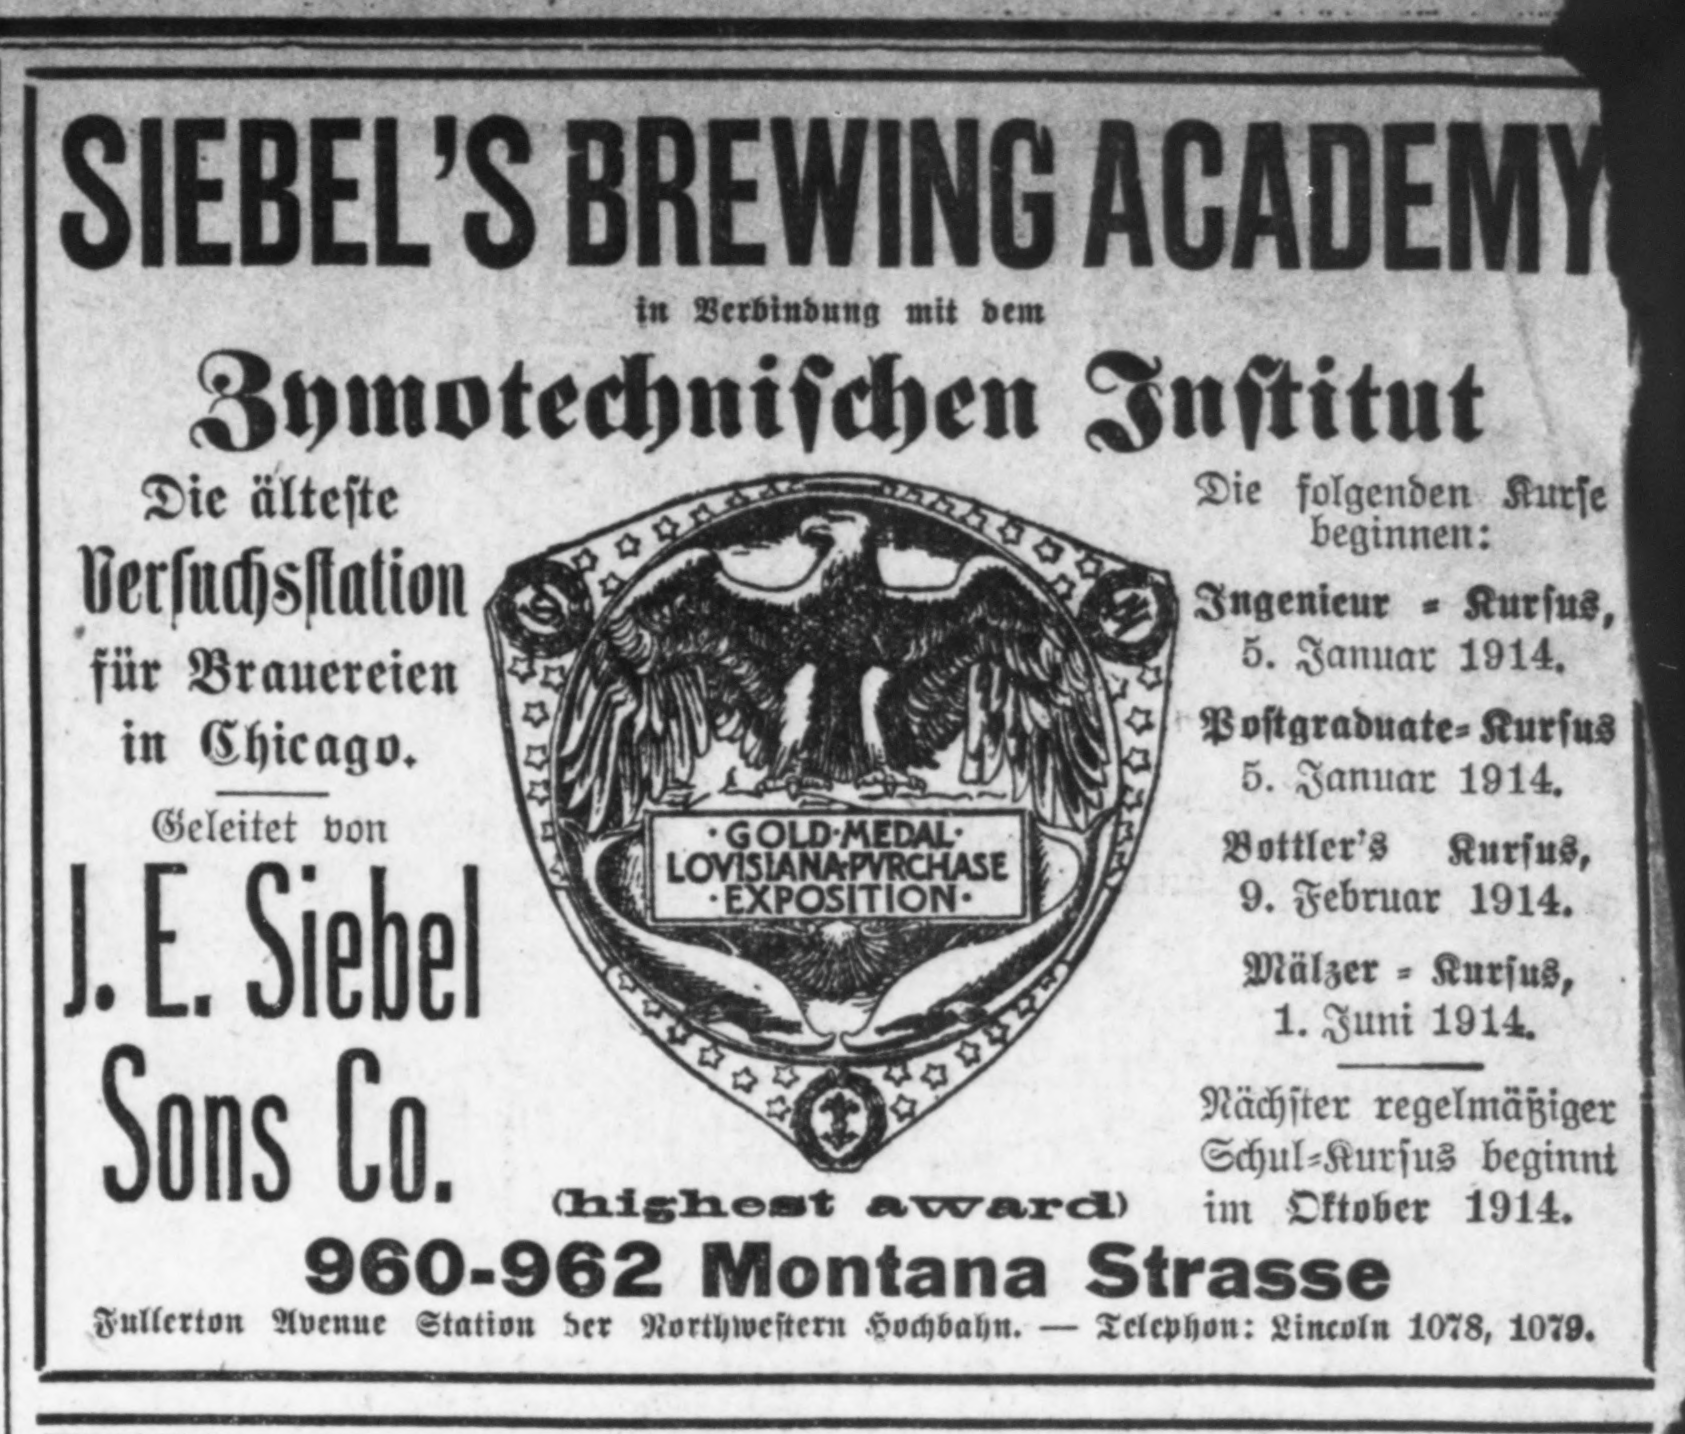 Zymotechnic Institute and Siebel's Brewing Academy, Chicago